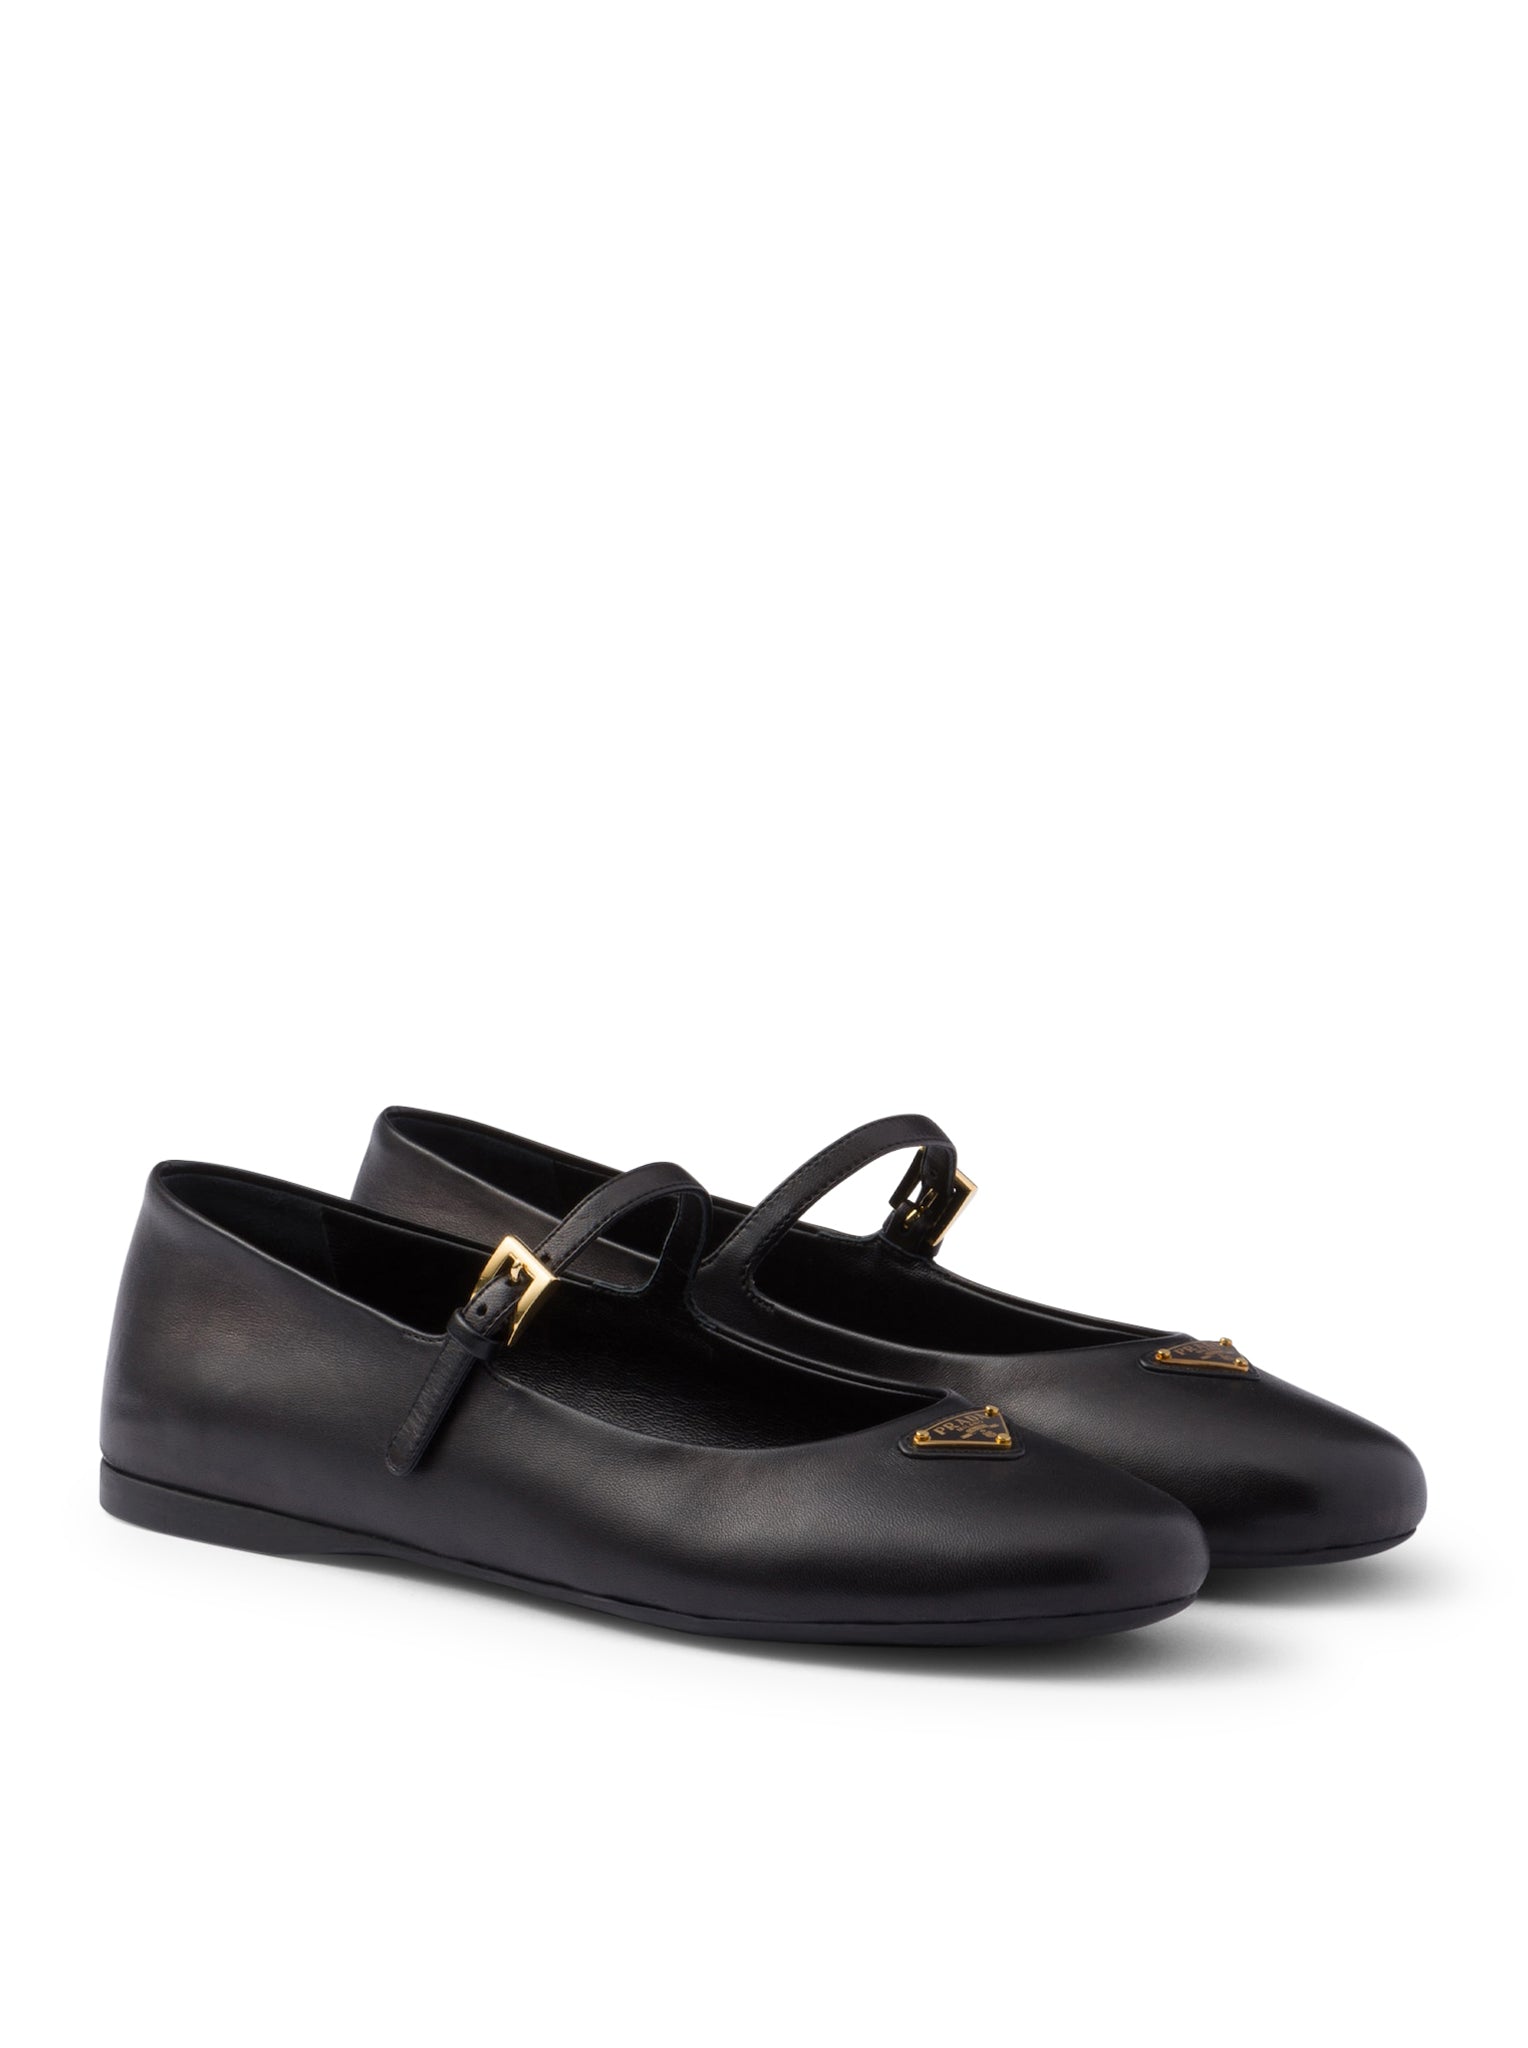 Nappa leather ballet flats